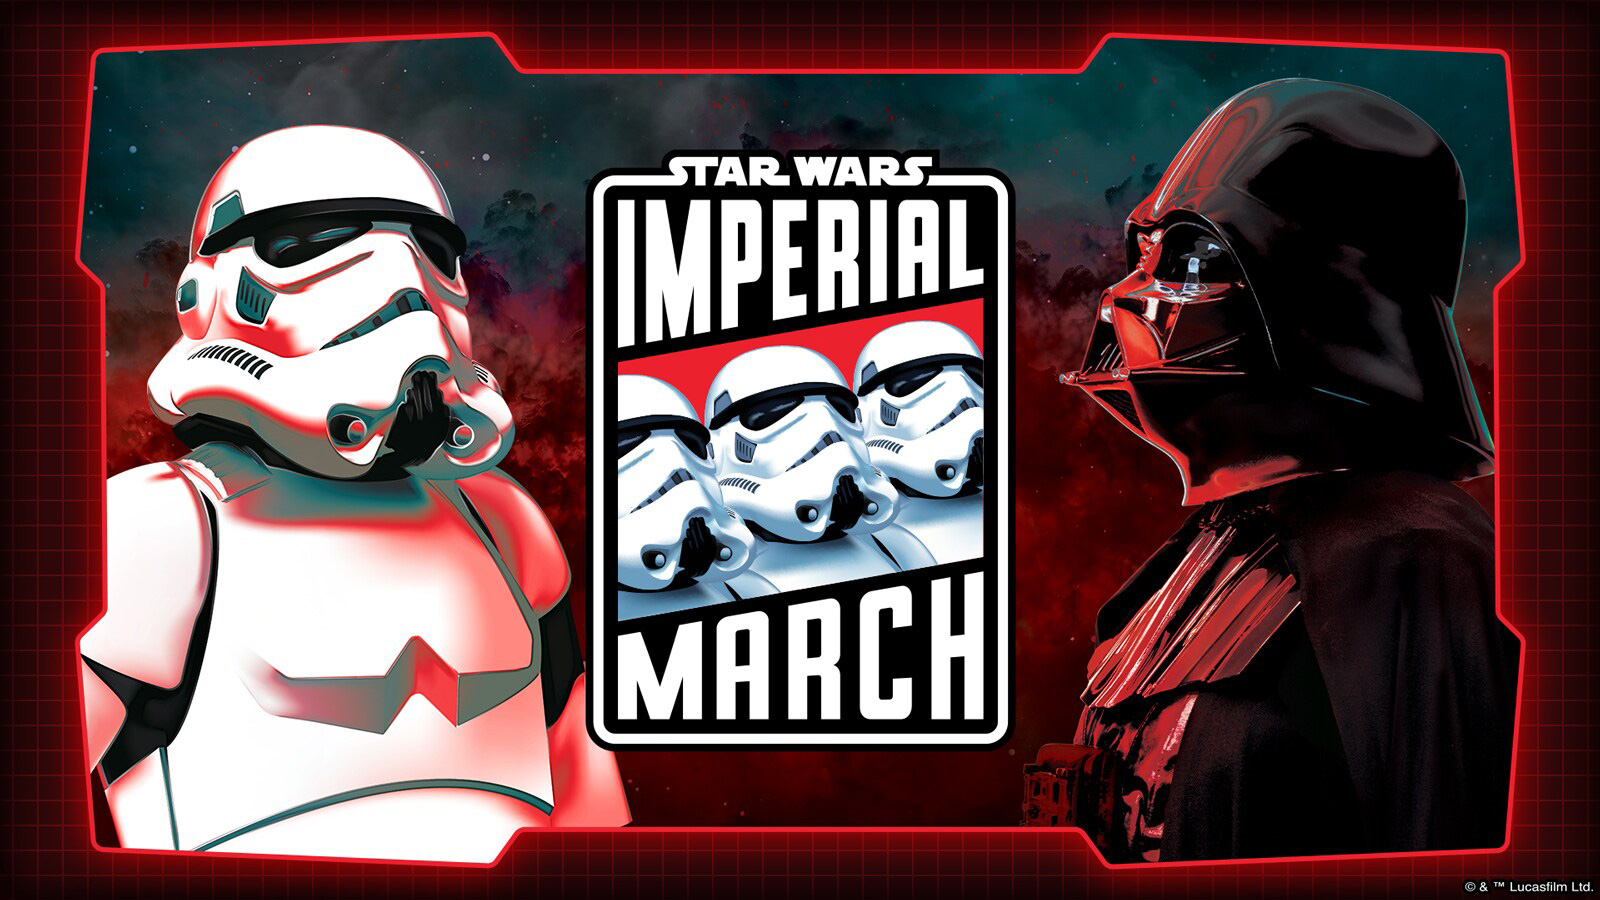 New “Imperial March” Product Launch Program